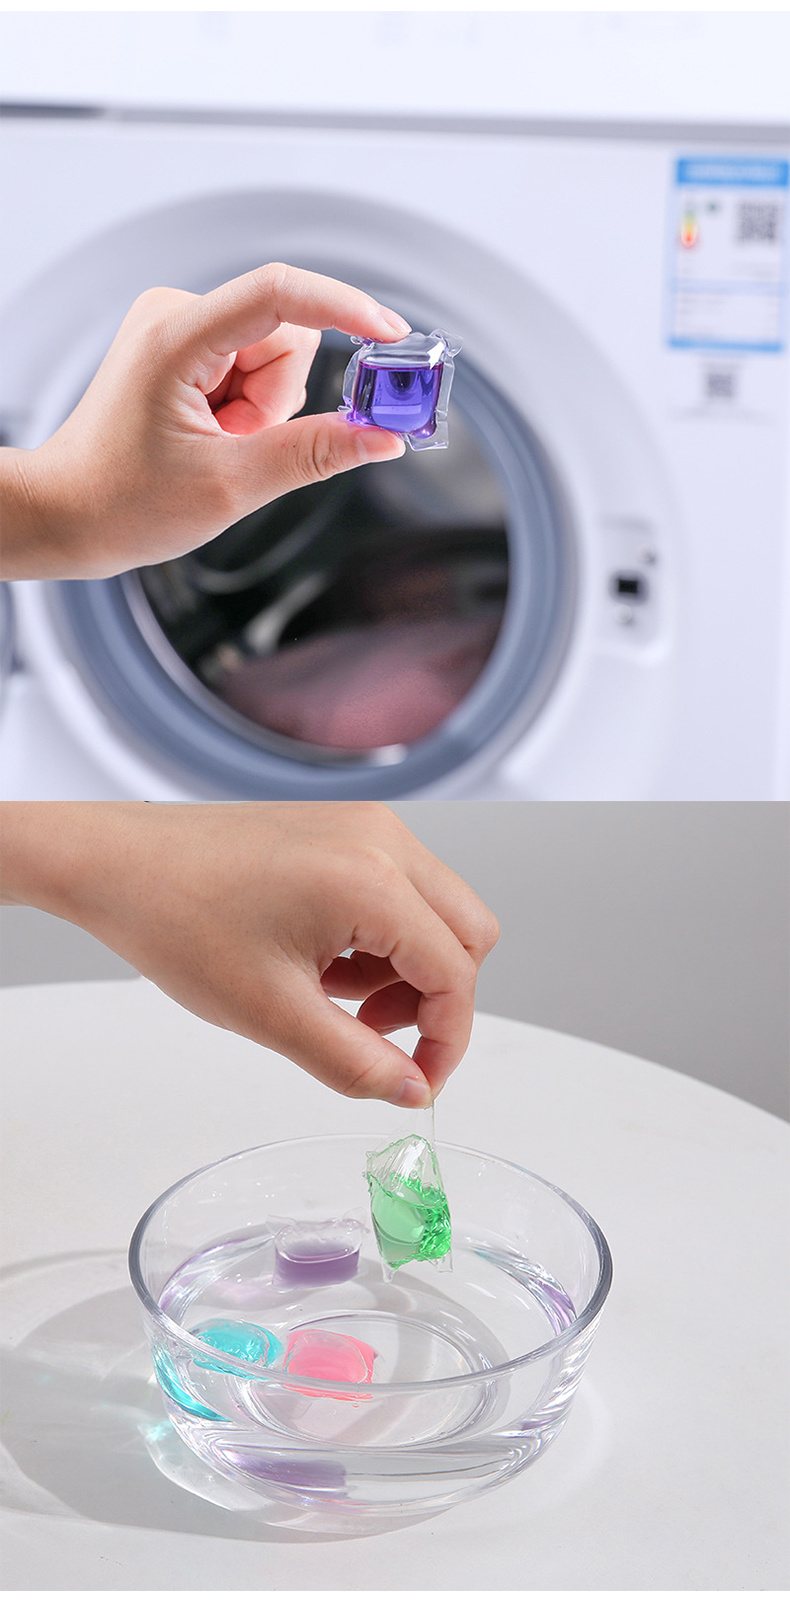 Clothes Washing Detergent Laundry Beads Bulk Laundry Detergent Pods